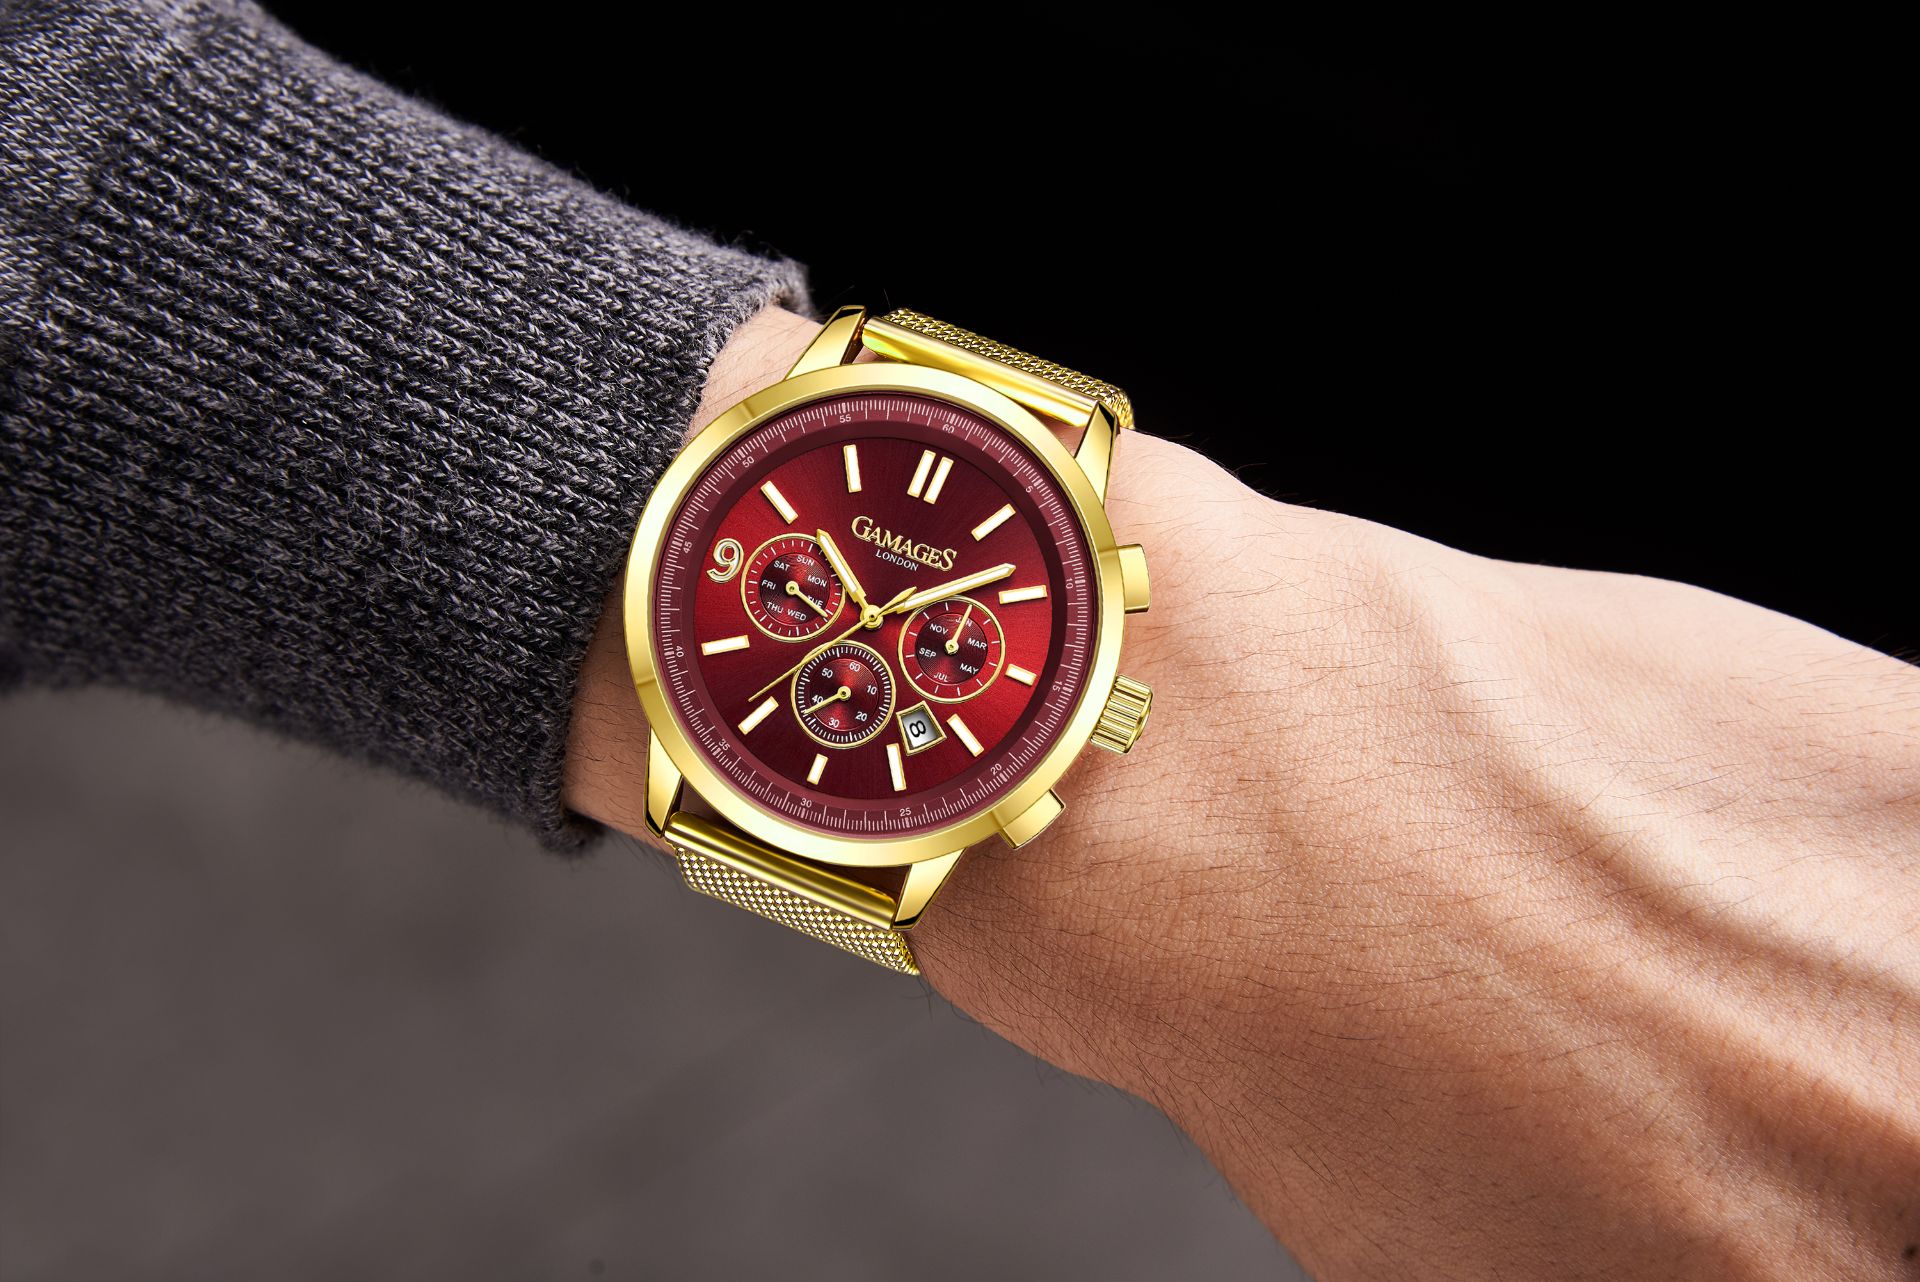 Ltd Edition Hand Assembled Gamages Omniscient Automatic Red Gold - 5 Year Warranty & Free Delivery - Image 4 of 5